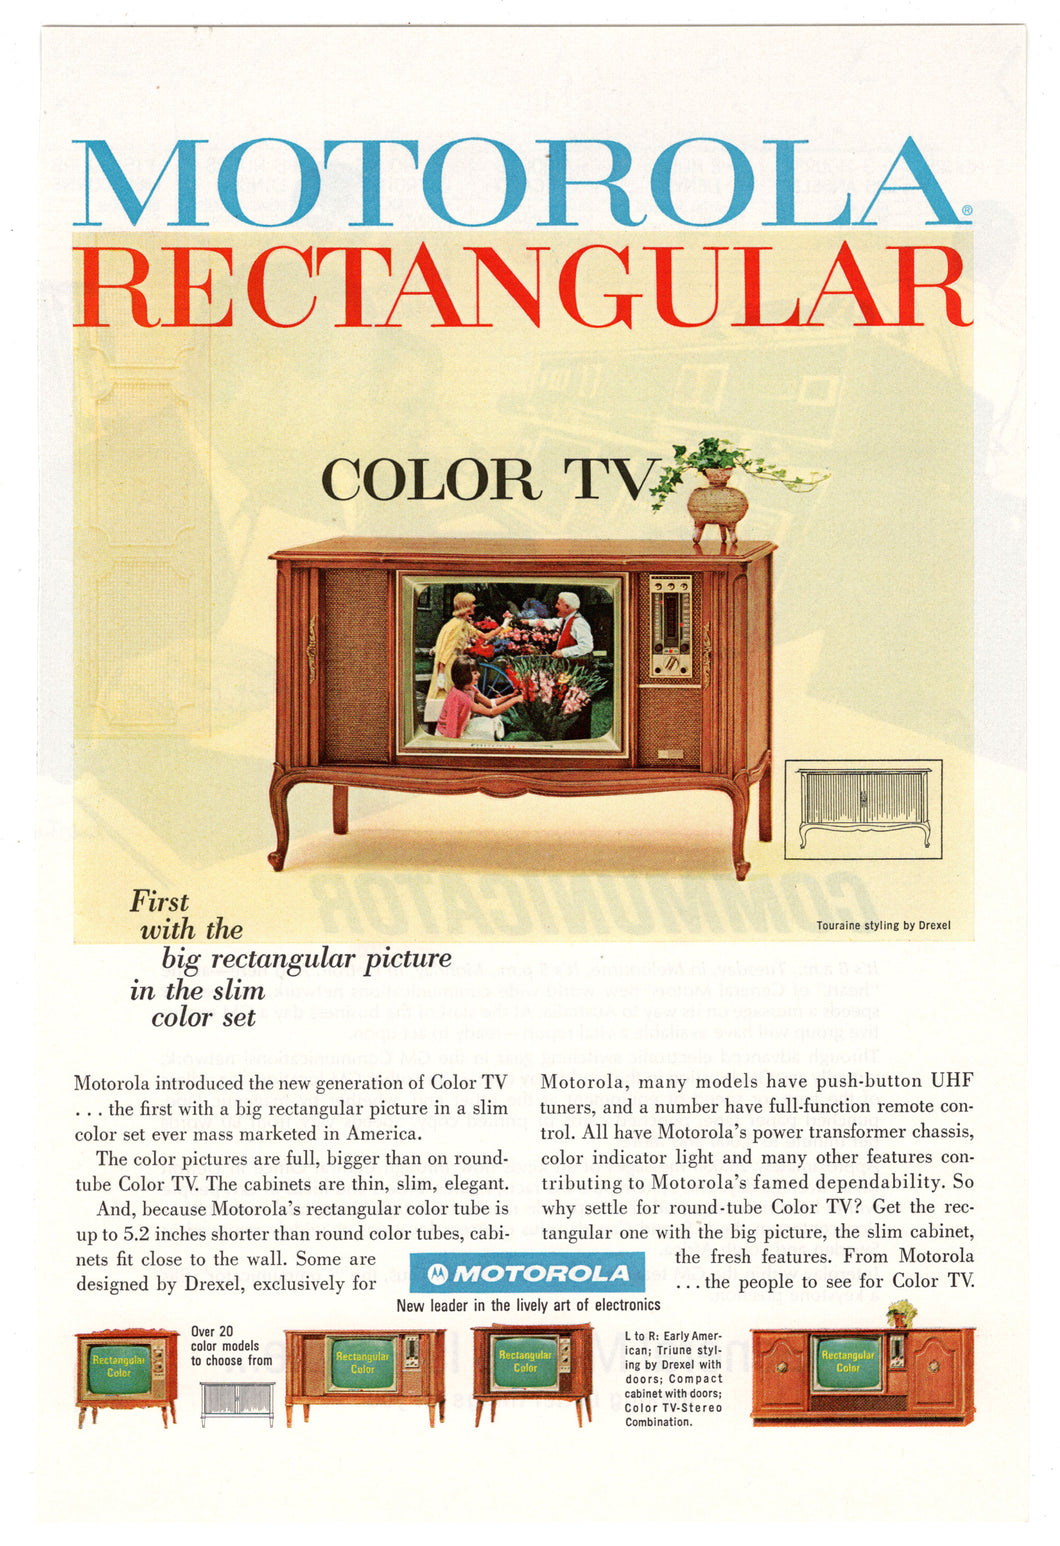 Motorola Rectangular Color Television Vintage Ad - (First with the Big Rectangular Picture) # 284 - 1960's